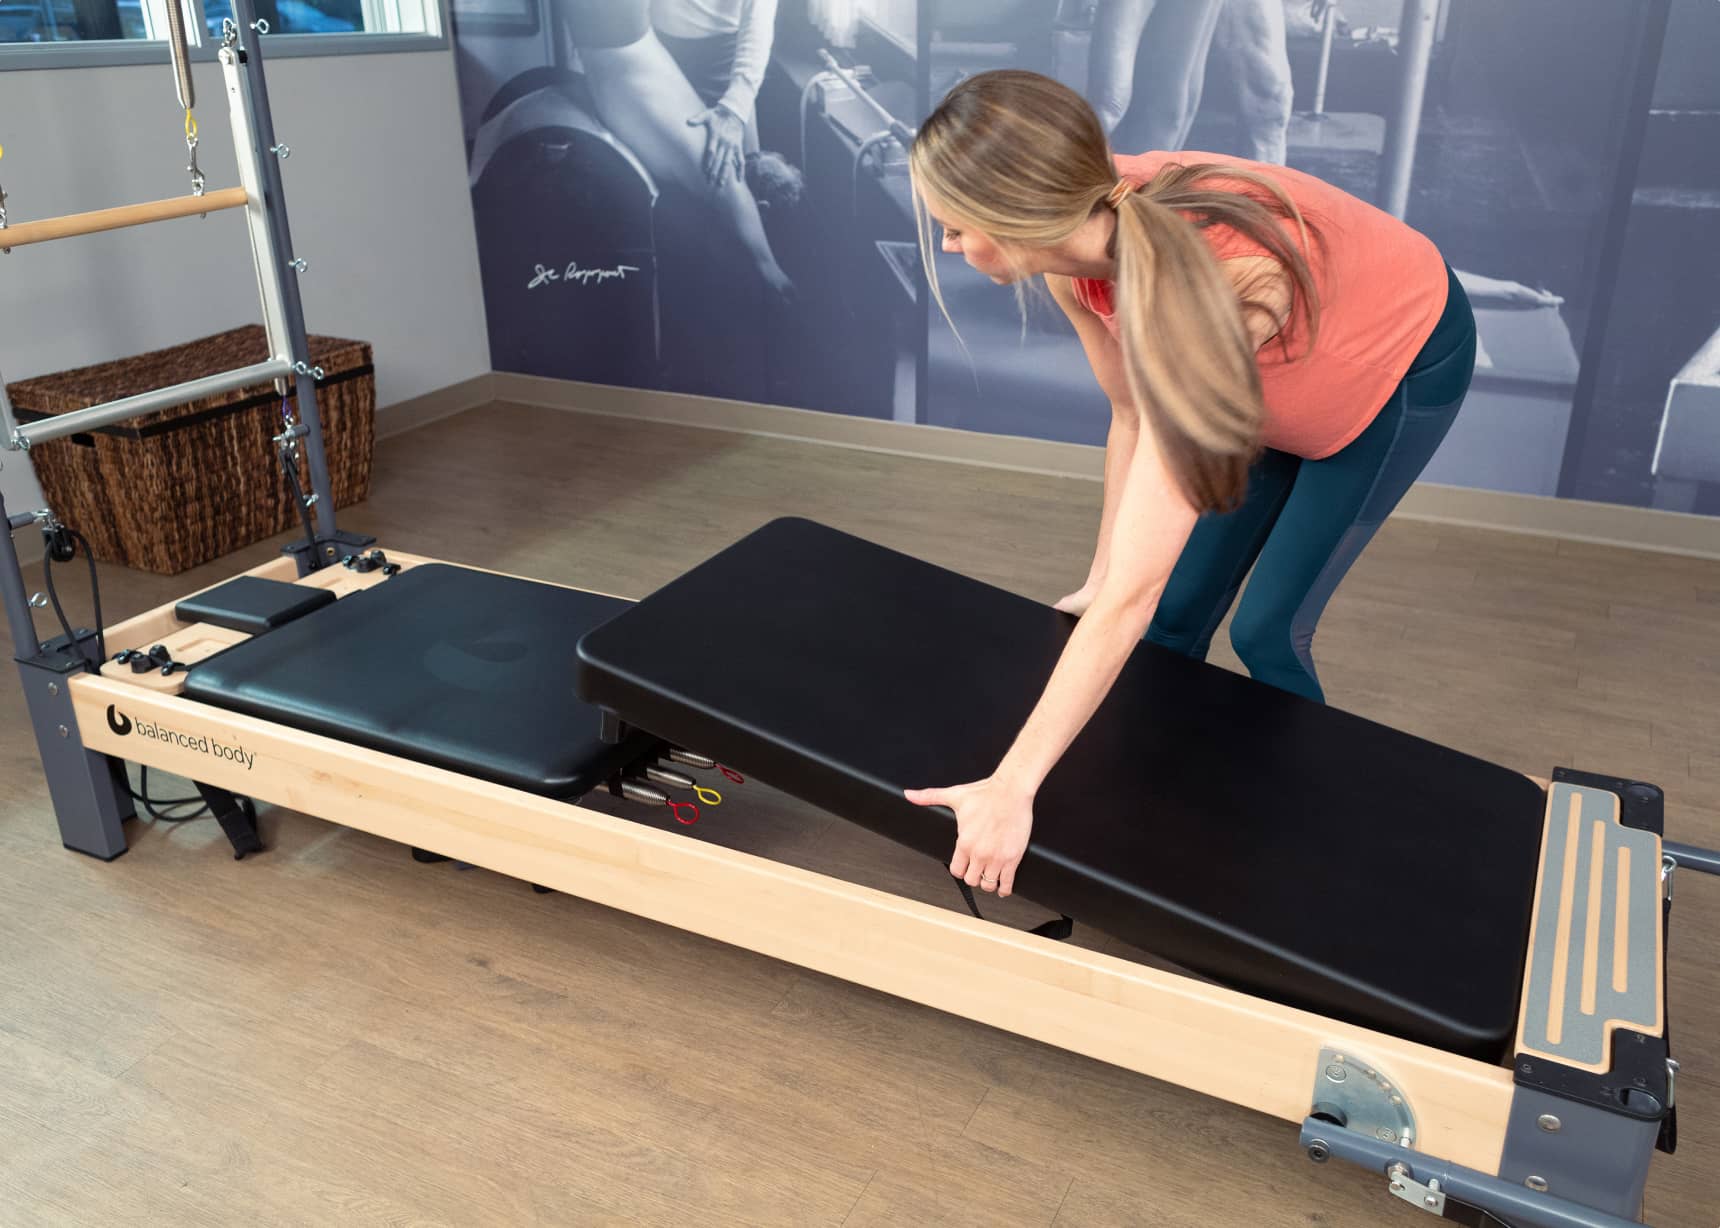 Merrithew® Pilates Reformer Vertical Frames - Buy Online at Physical Company